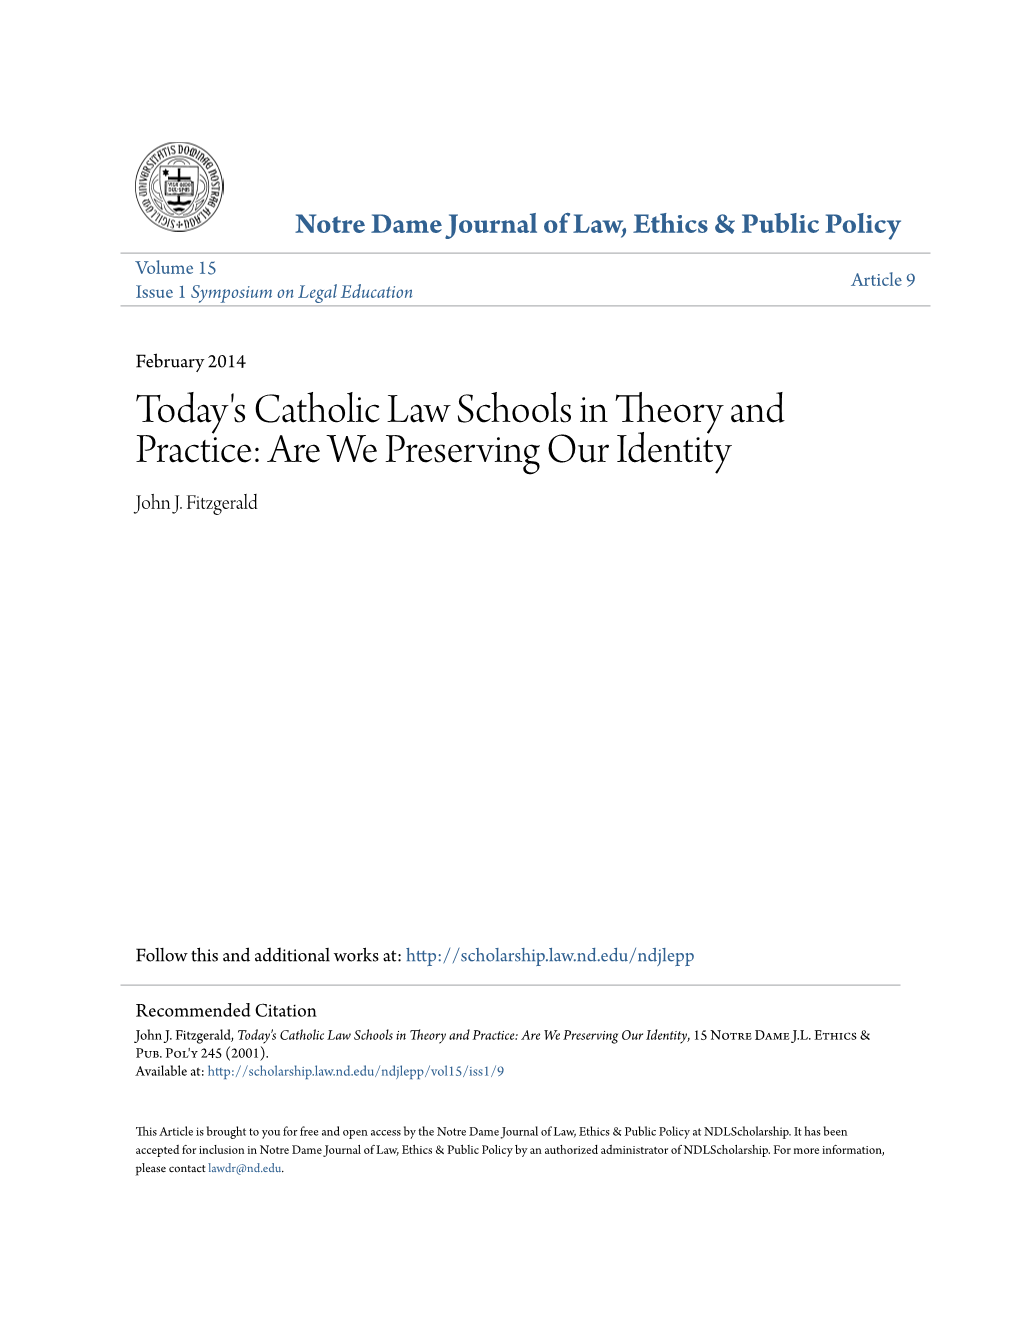 Today's Catholic Law Schools in Theory and Practice: Are We Preserving Our Identity John J